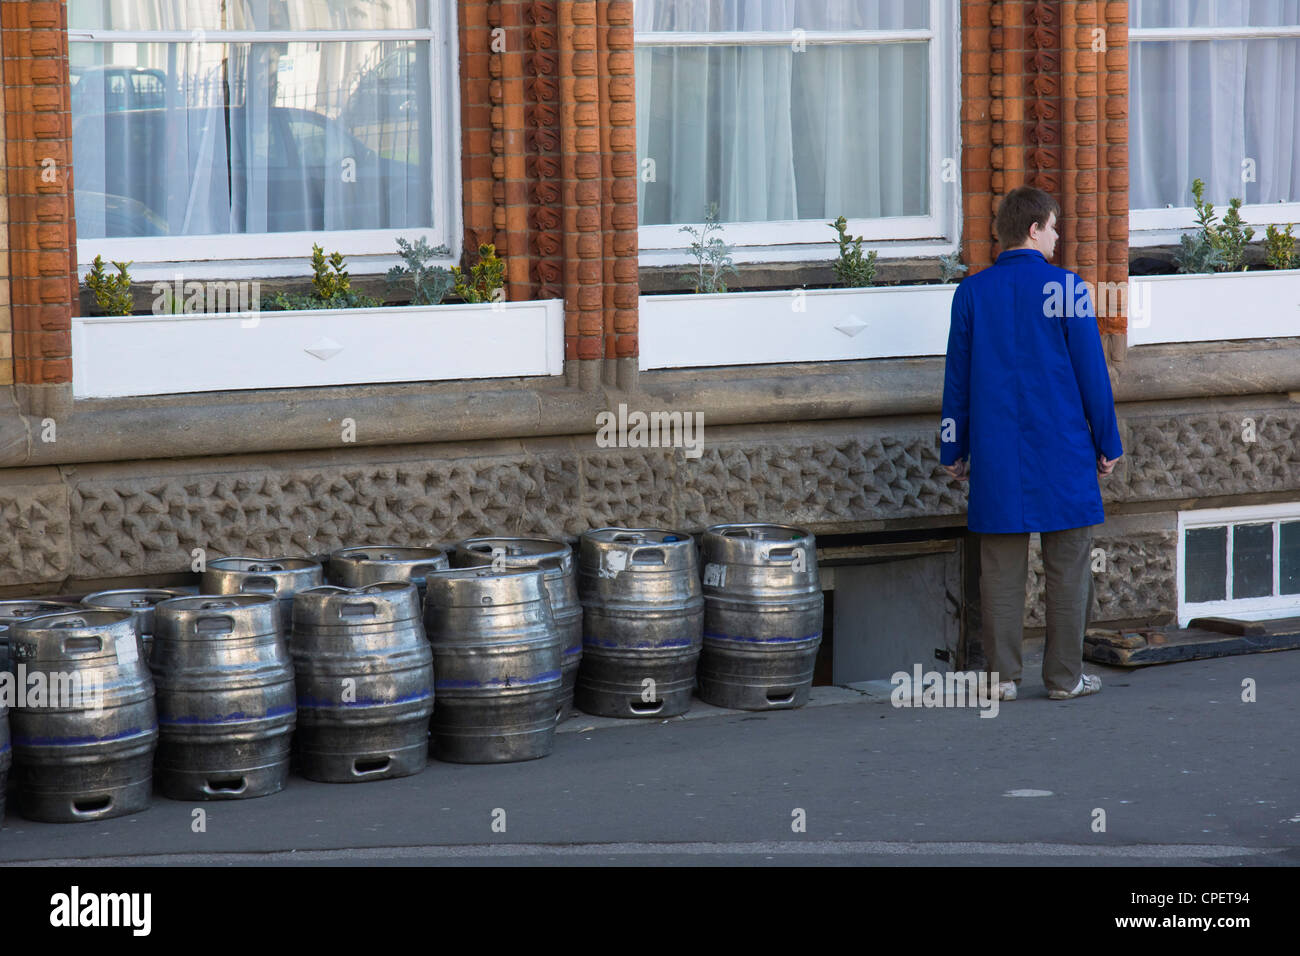 Scarborough, Yorkshire, UK - beer delivery to the Grand Hotel. Stock Photo